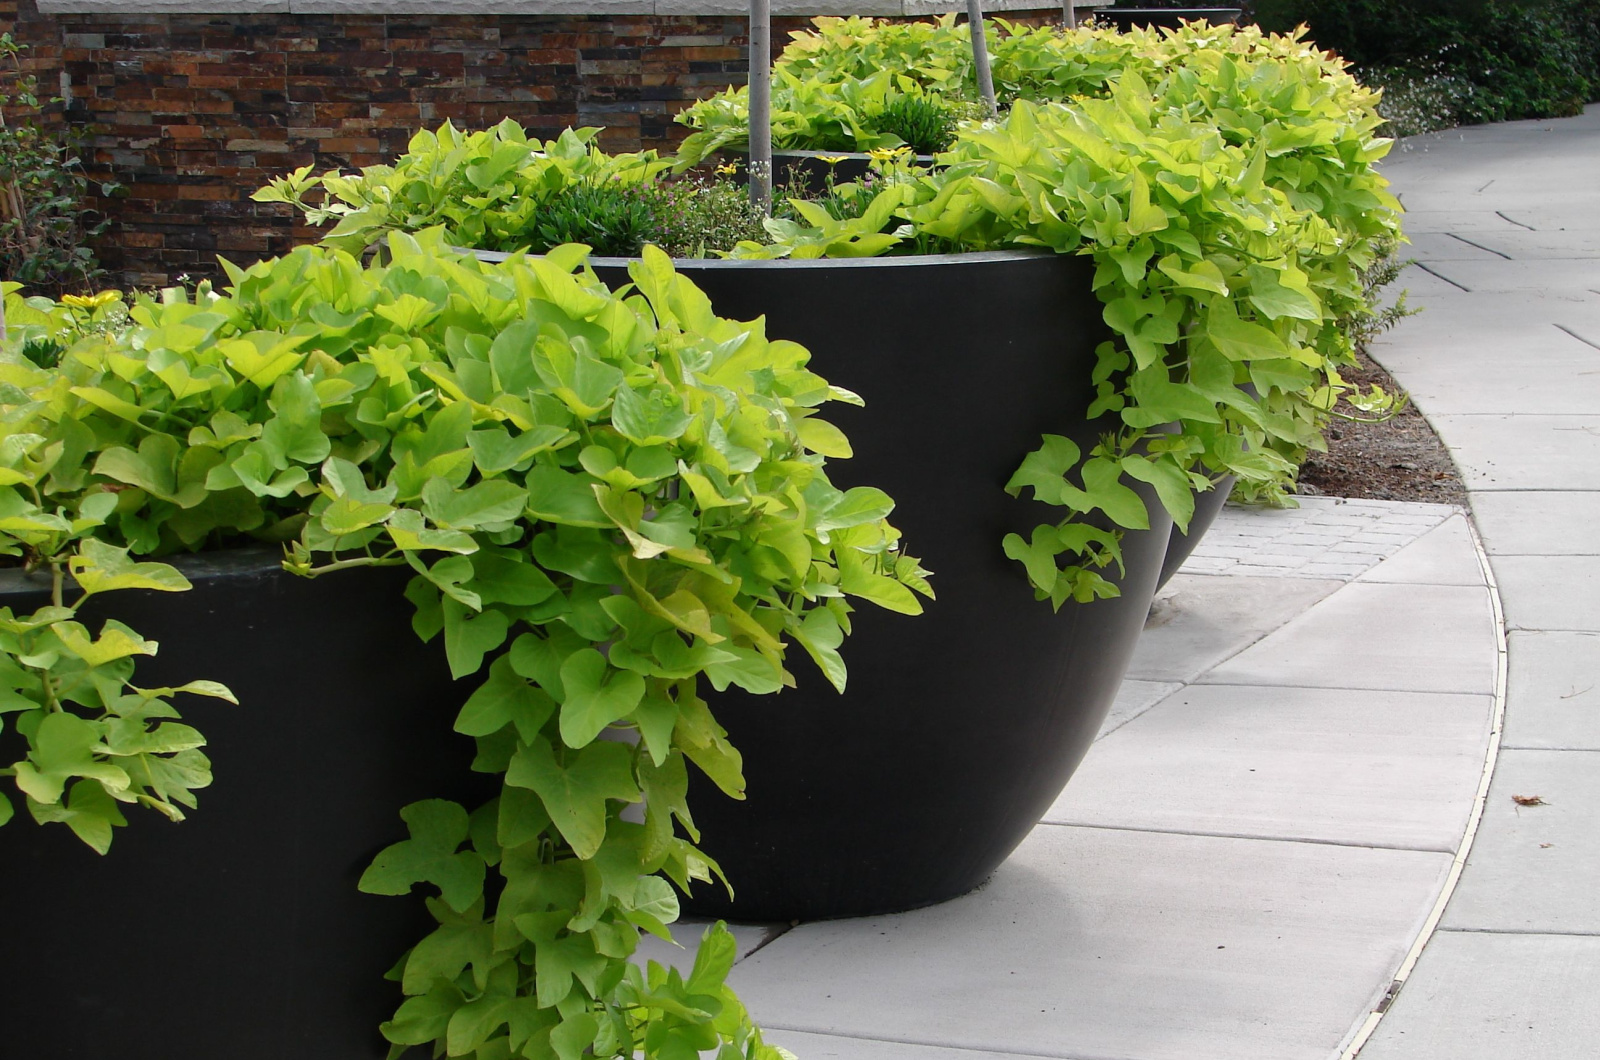 Sweet potato vines in containers